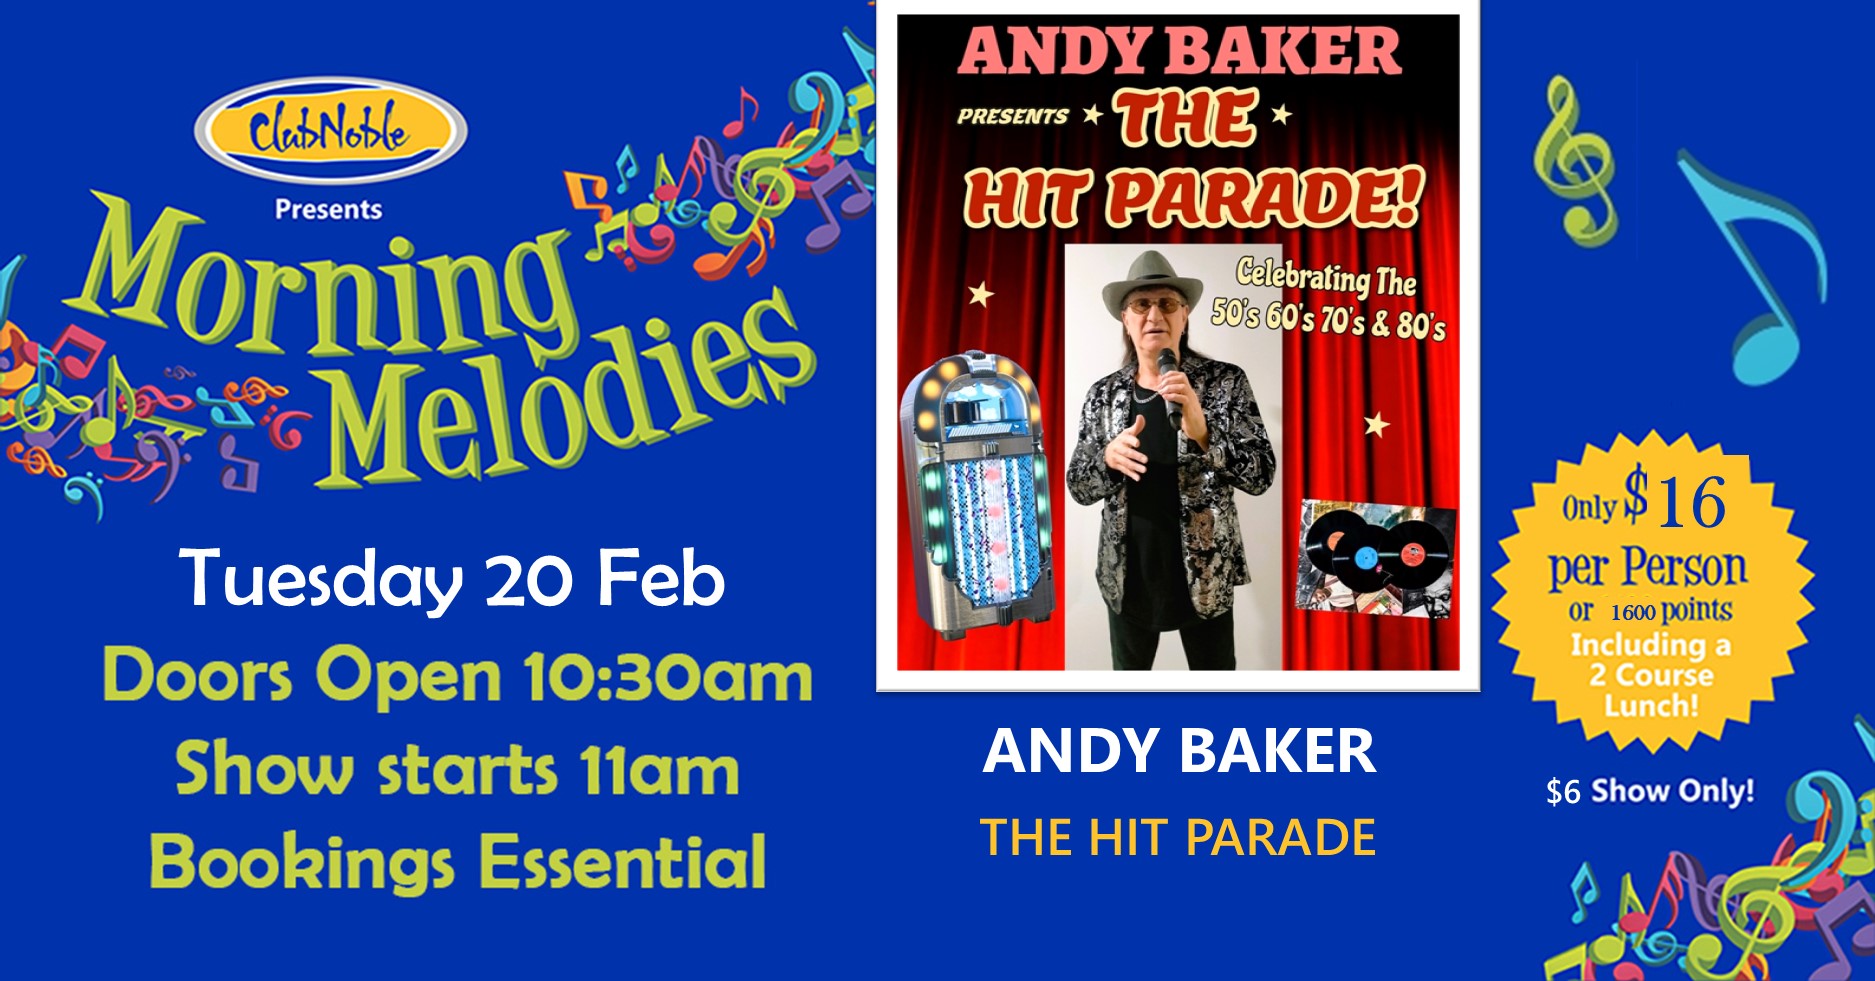 Morning Melodies presents Andy Baker singing The Hit Parade, celebrating 50s,60s,70s & 80’s.